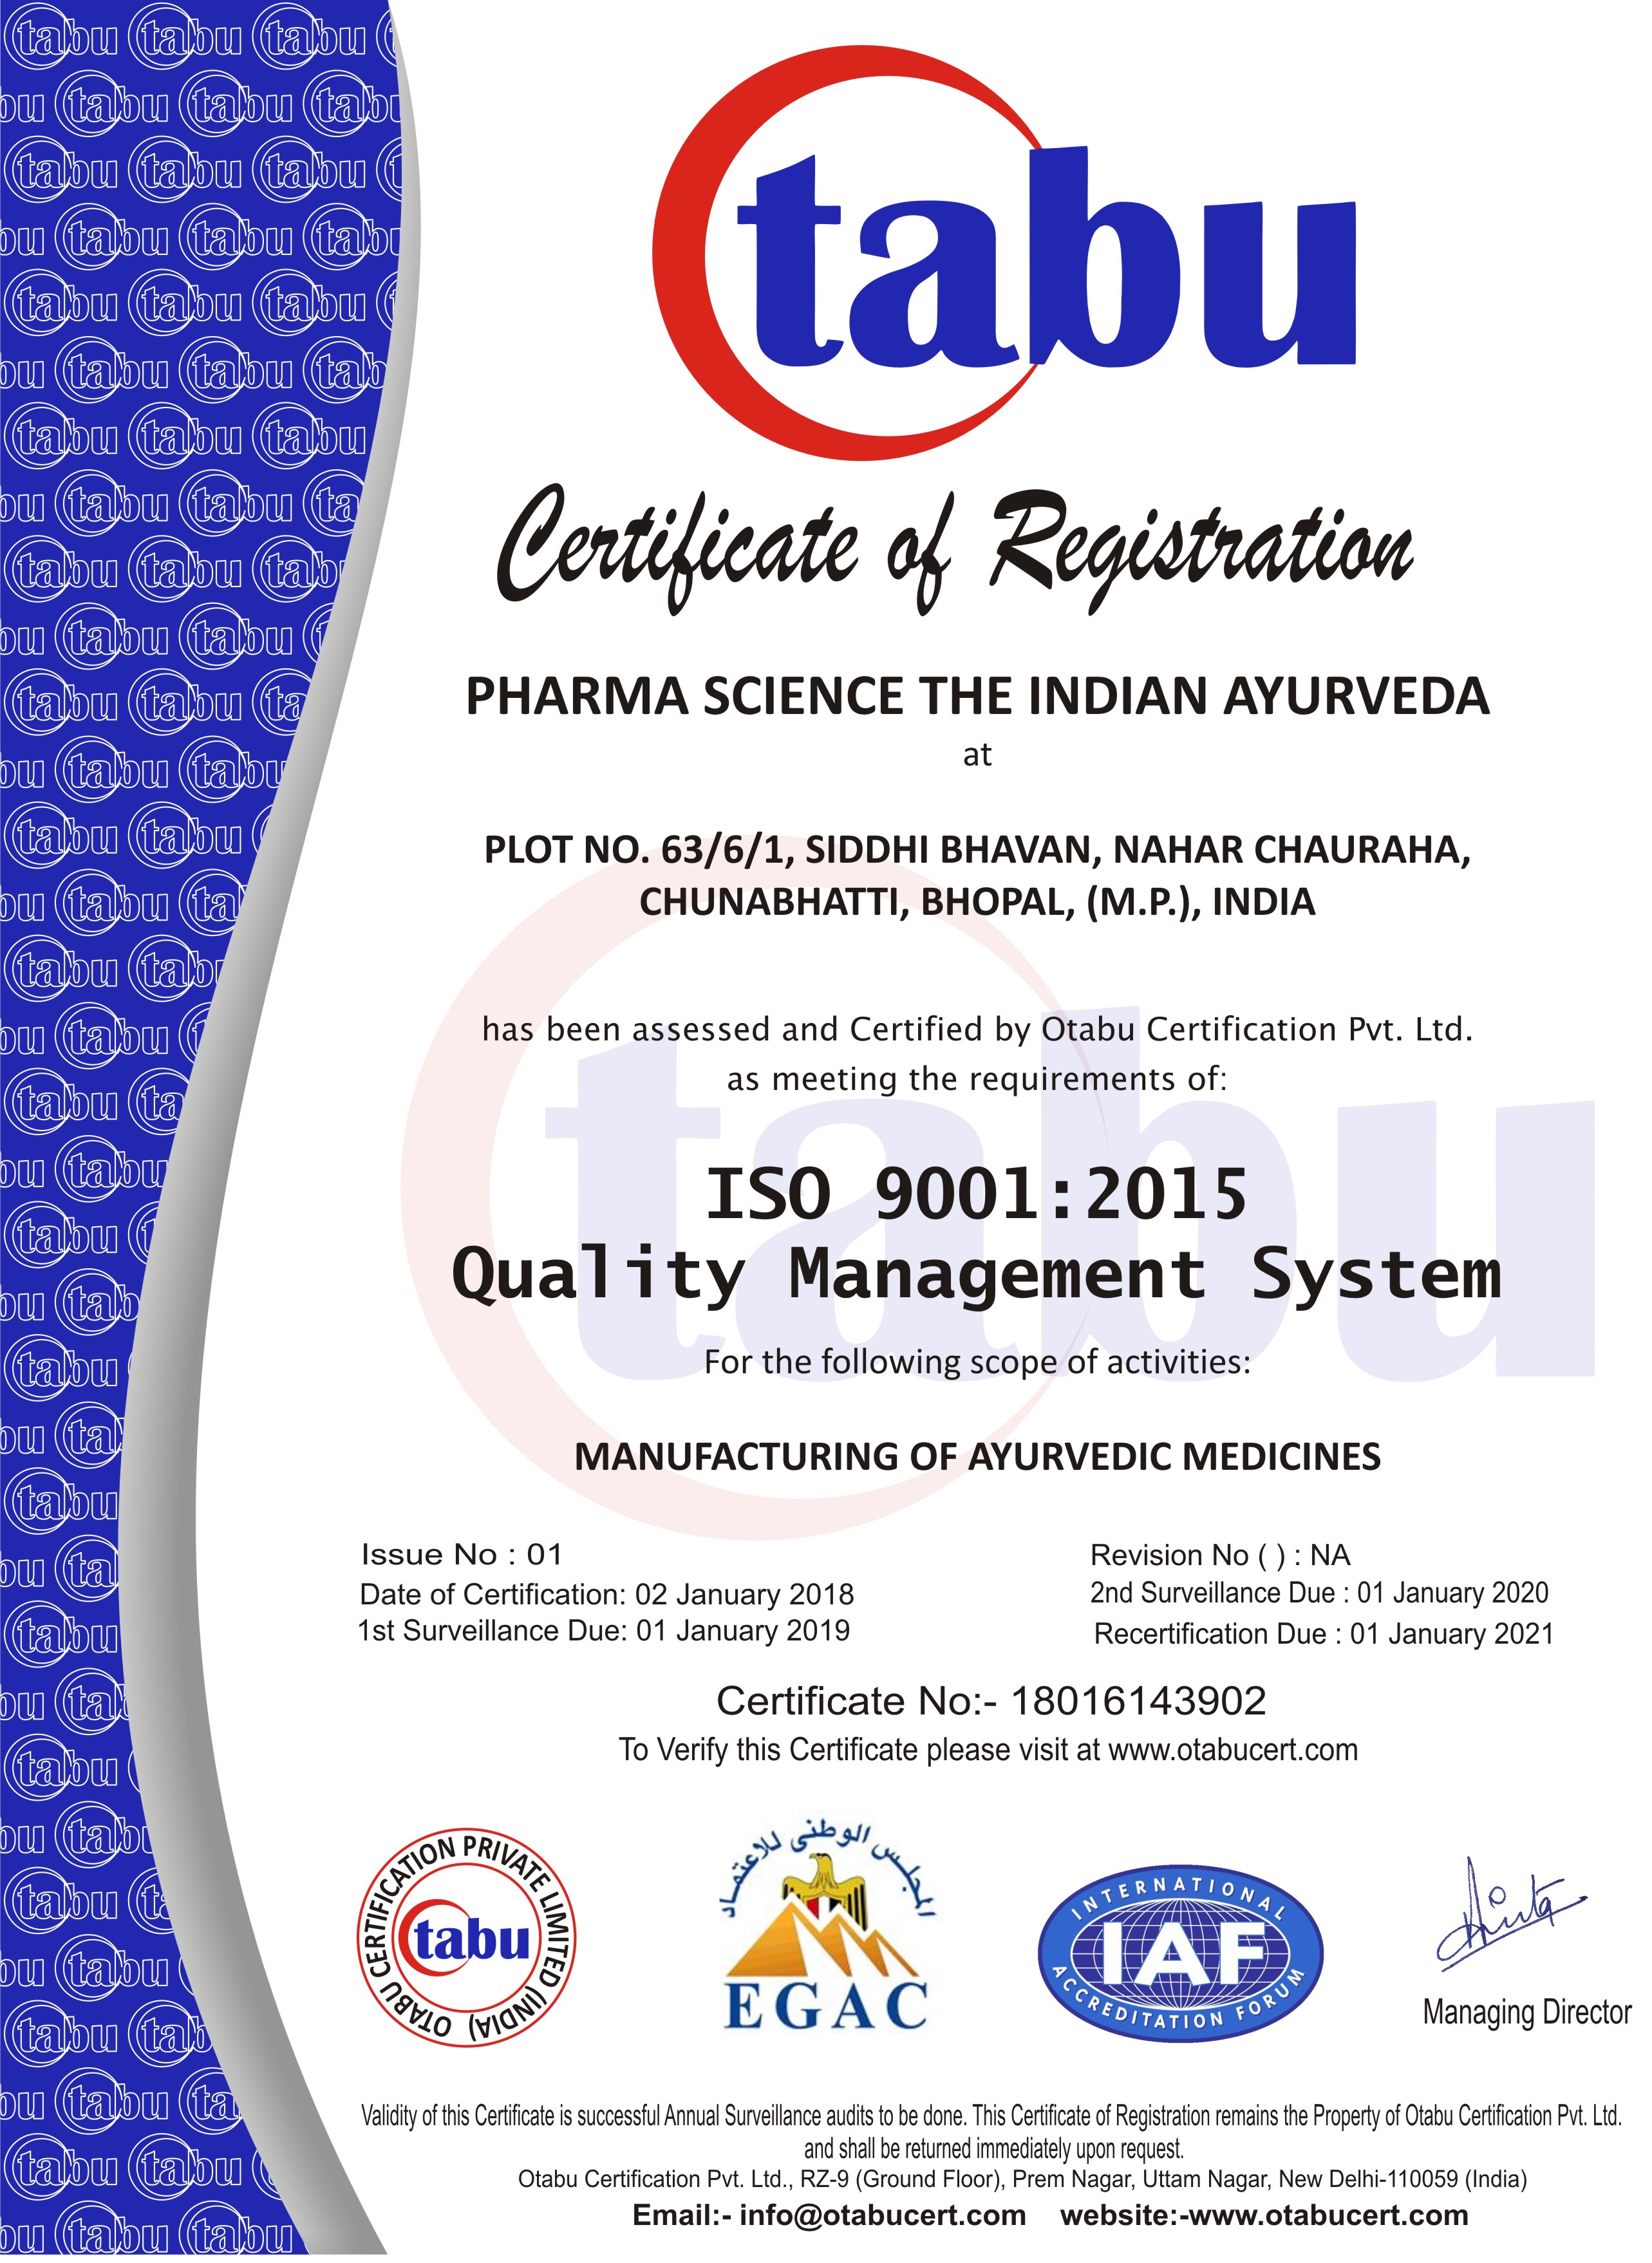 Legal And Certificates Pharmascience